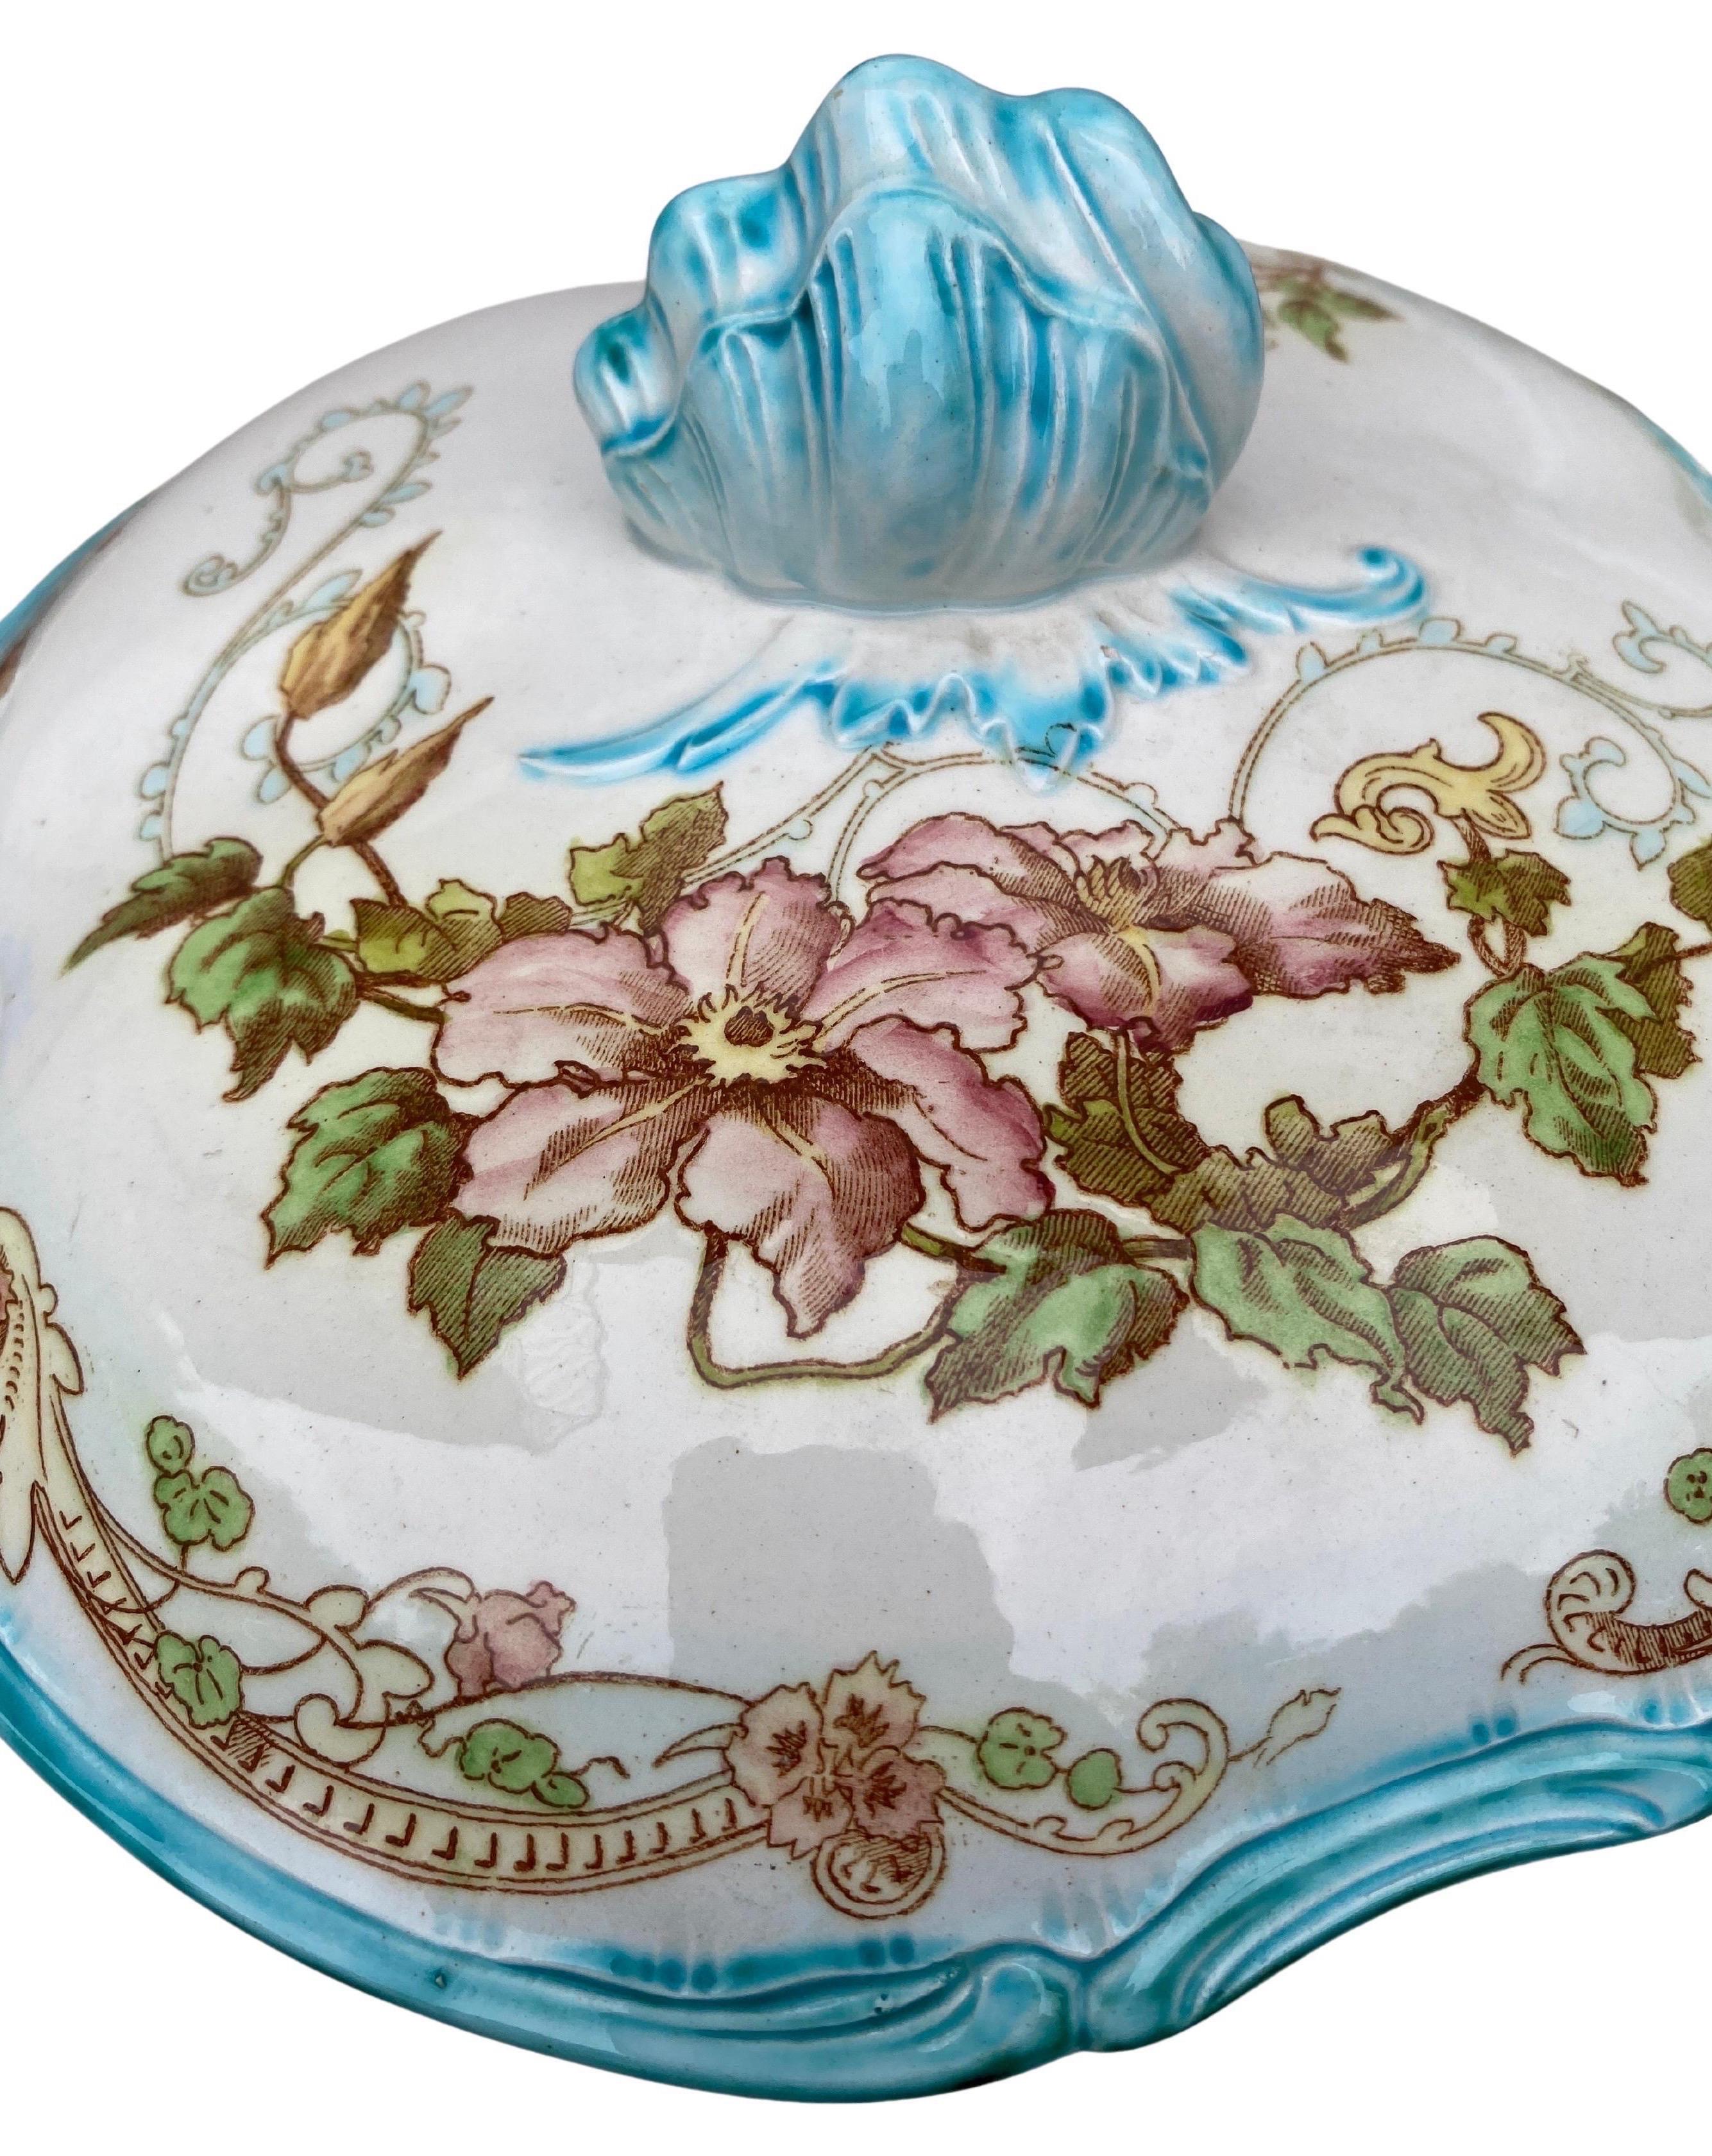 French Faience Saint Cloud Tureen signed Creil et Montereau Circa 1890.
Painted roses and wild roses , shell handle.
Saint-Cloud is a commune in the western suburbs of Paris, France, 9.6 kilometres (6.0 miles) from the centre of Paris.